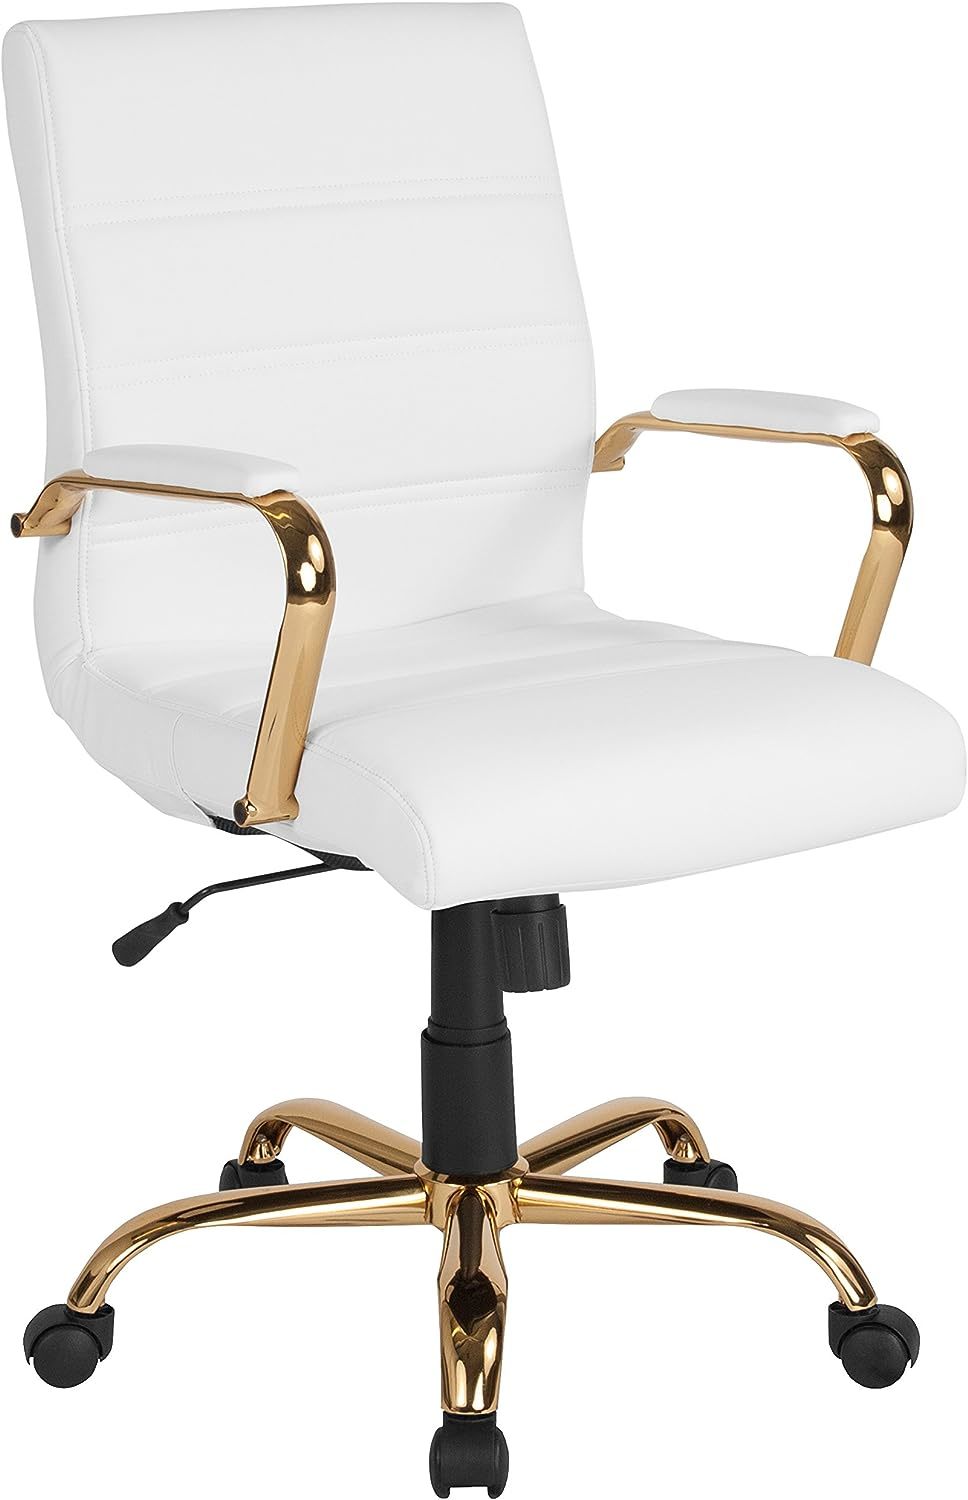 White Leathersoft Executive Swivel Office Chair With A Gold Frame From Flash - $166.93